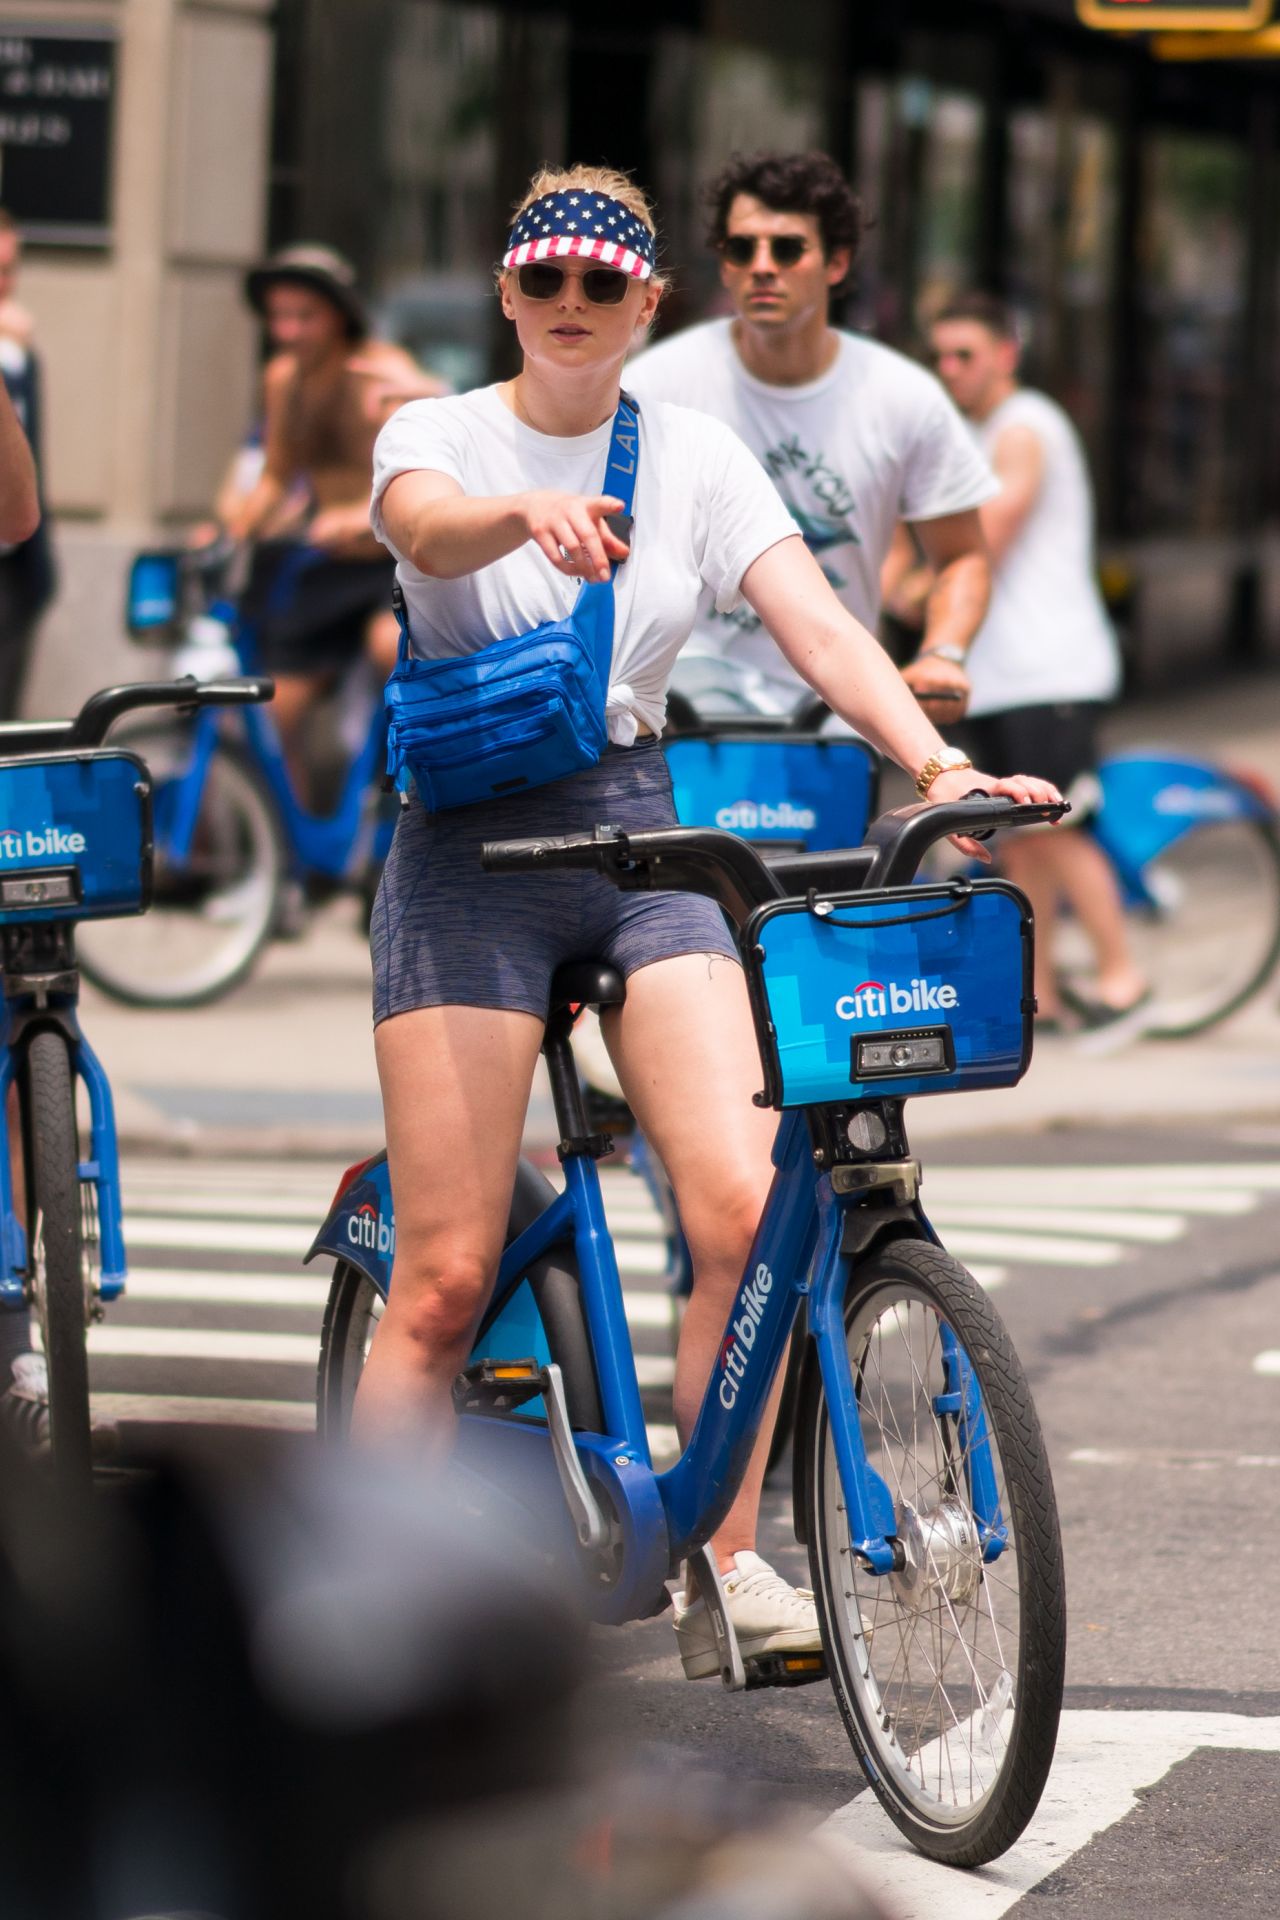 sophie-turner-and-priyanka-chopra-go-for-a-ride-on-citibikes-in-nyc-july-2018-0.jpg